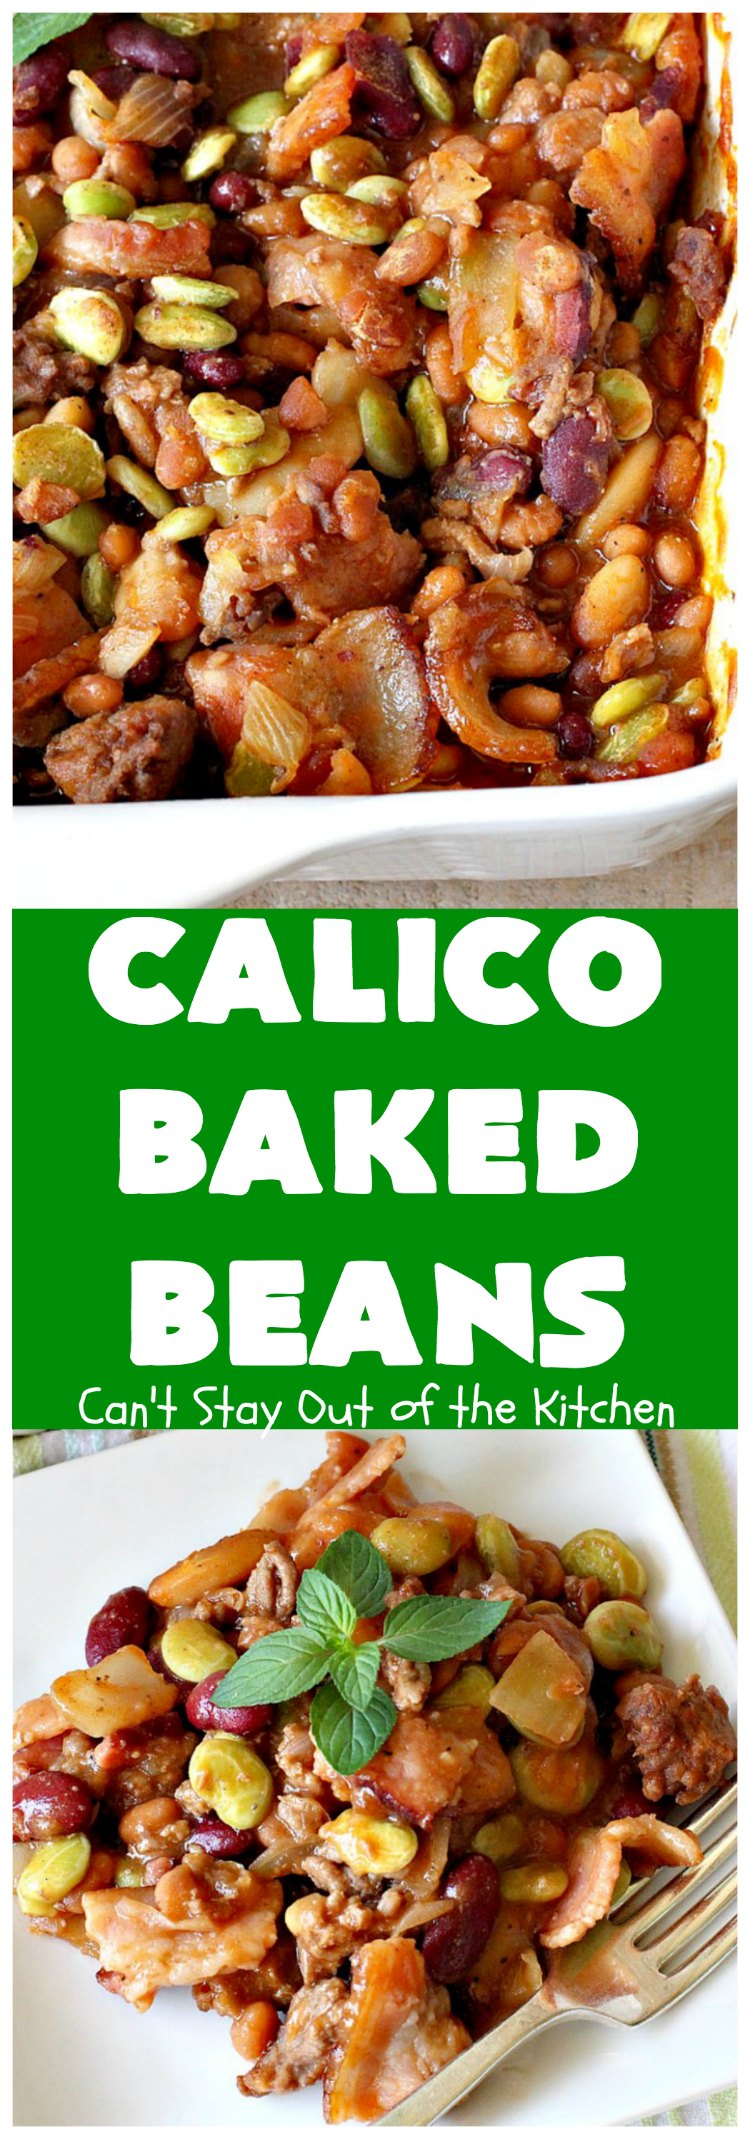 Calico Baked Beans | Can't Stay Out of the Kitchen